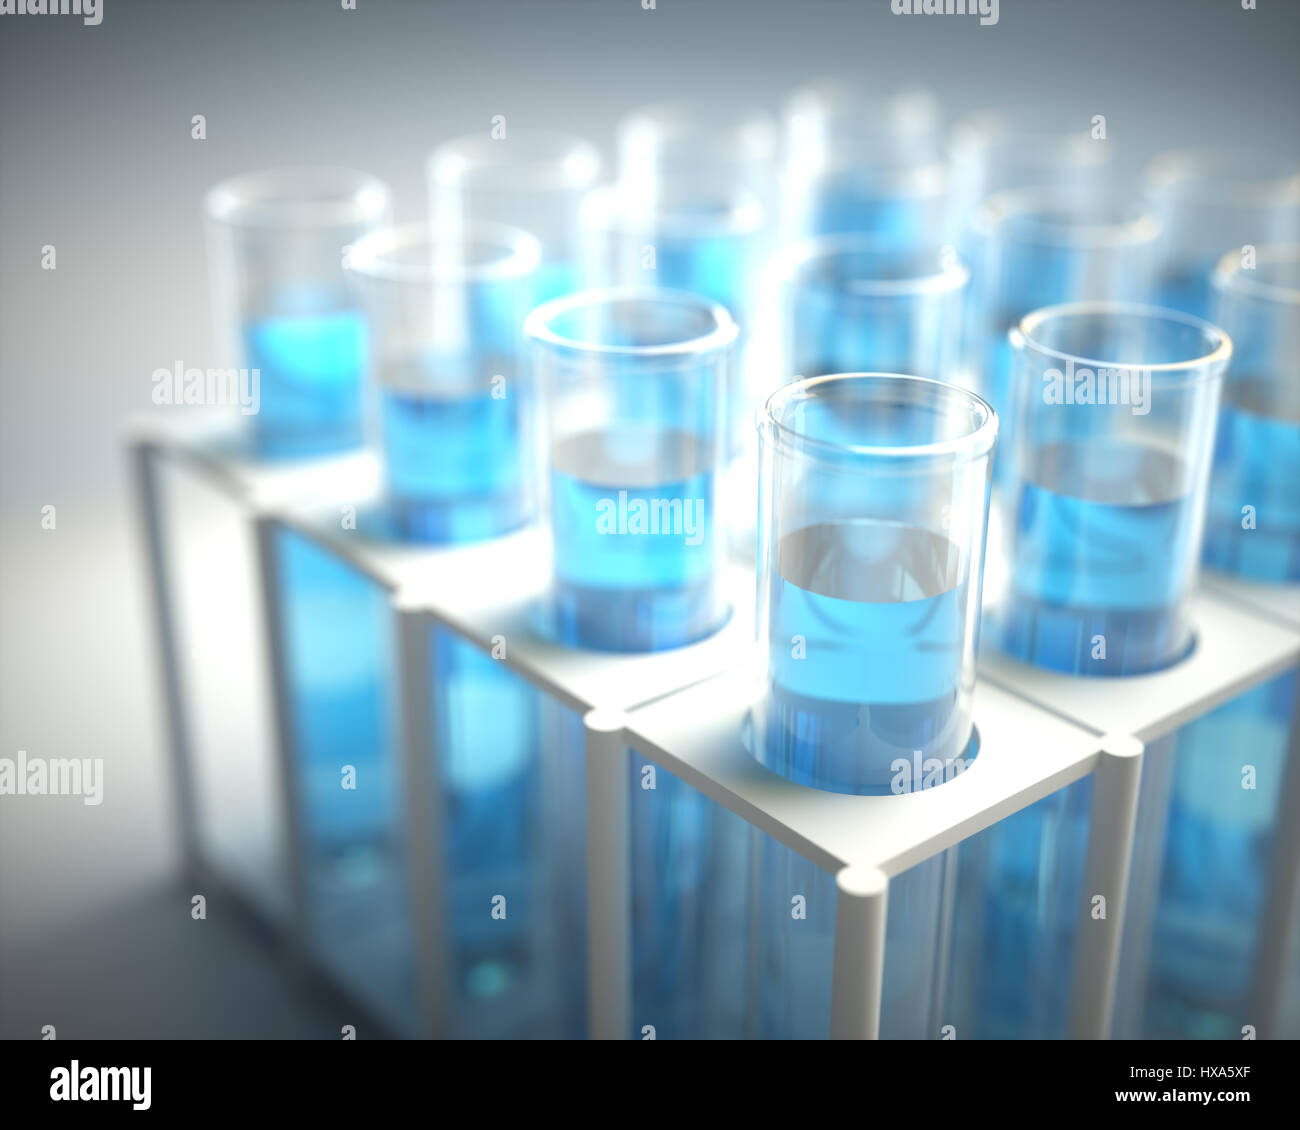 3D illustration. Test tubes filled with blue chemistry. Stock Photo